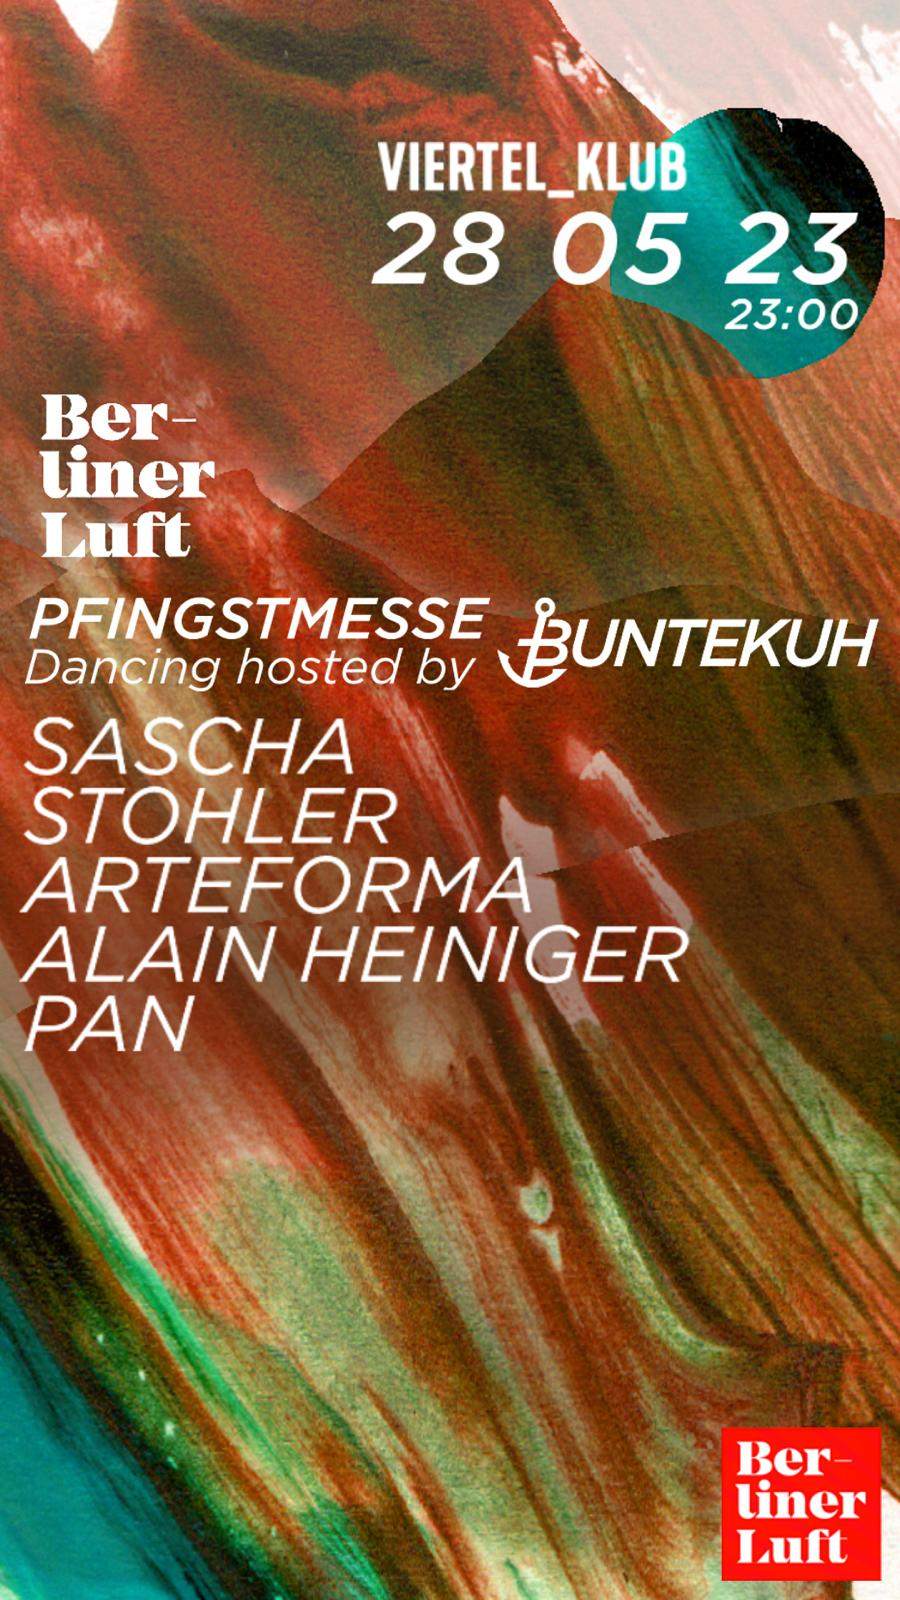 Berliner Luft - Dancing hosted by Bunte Kuh - Página frontal